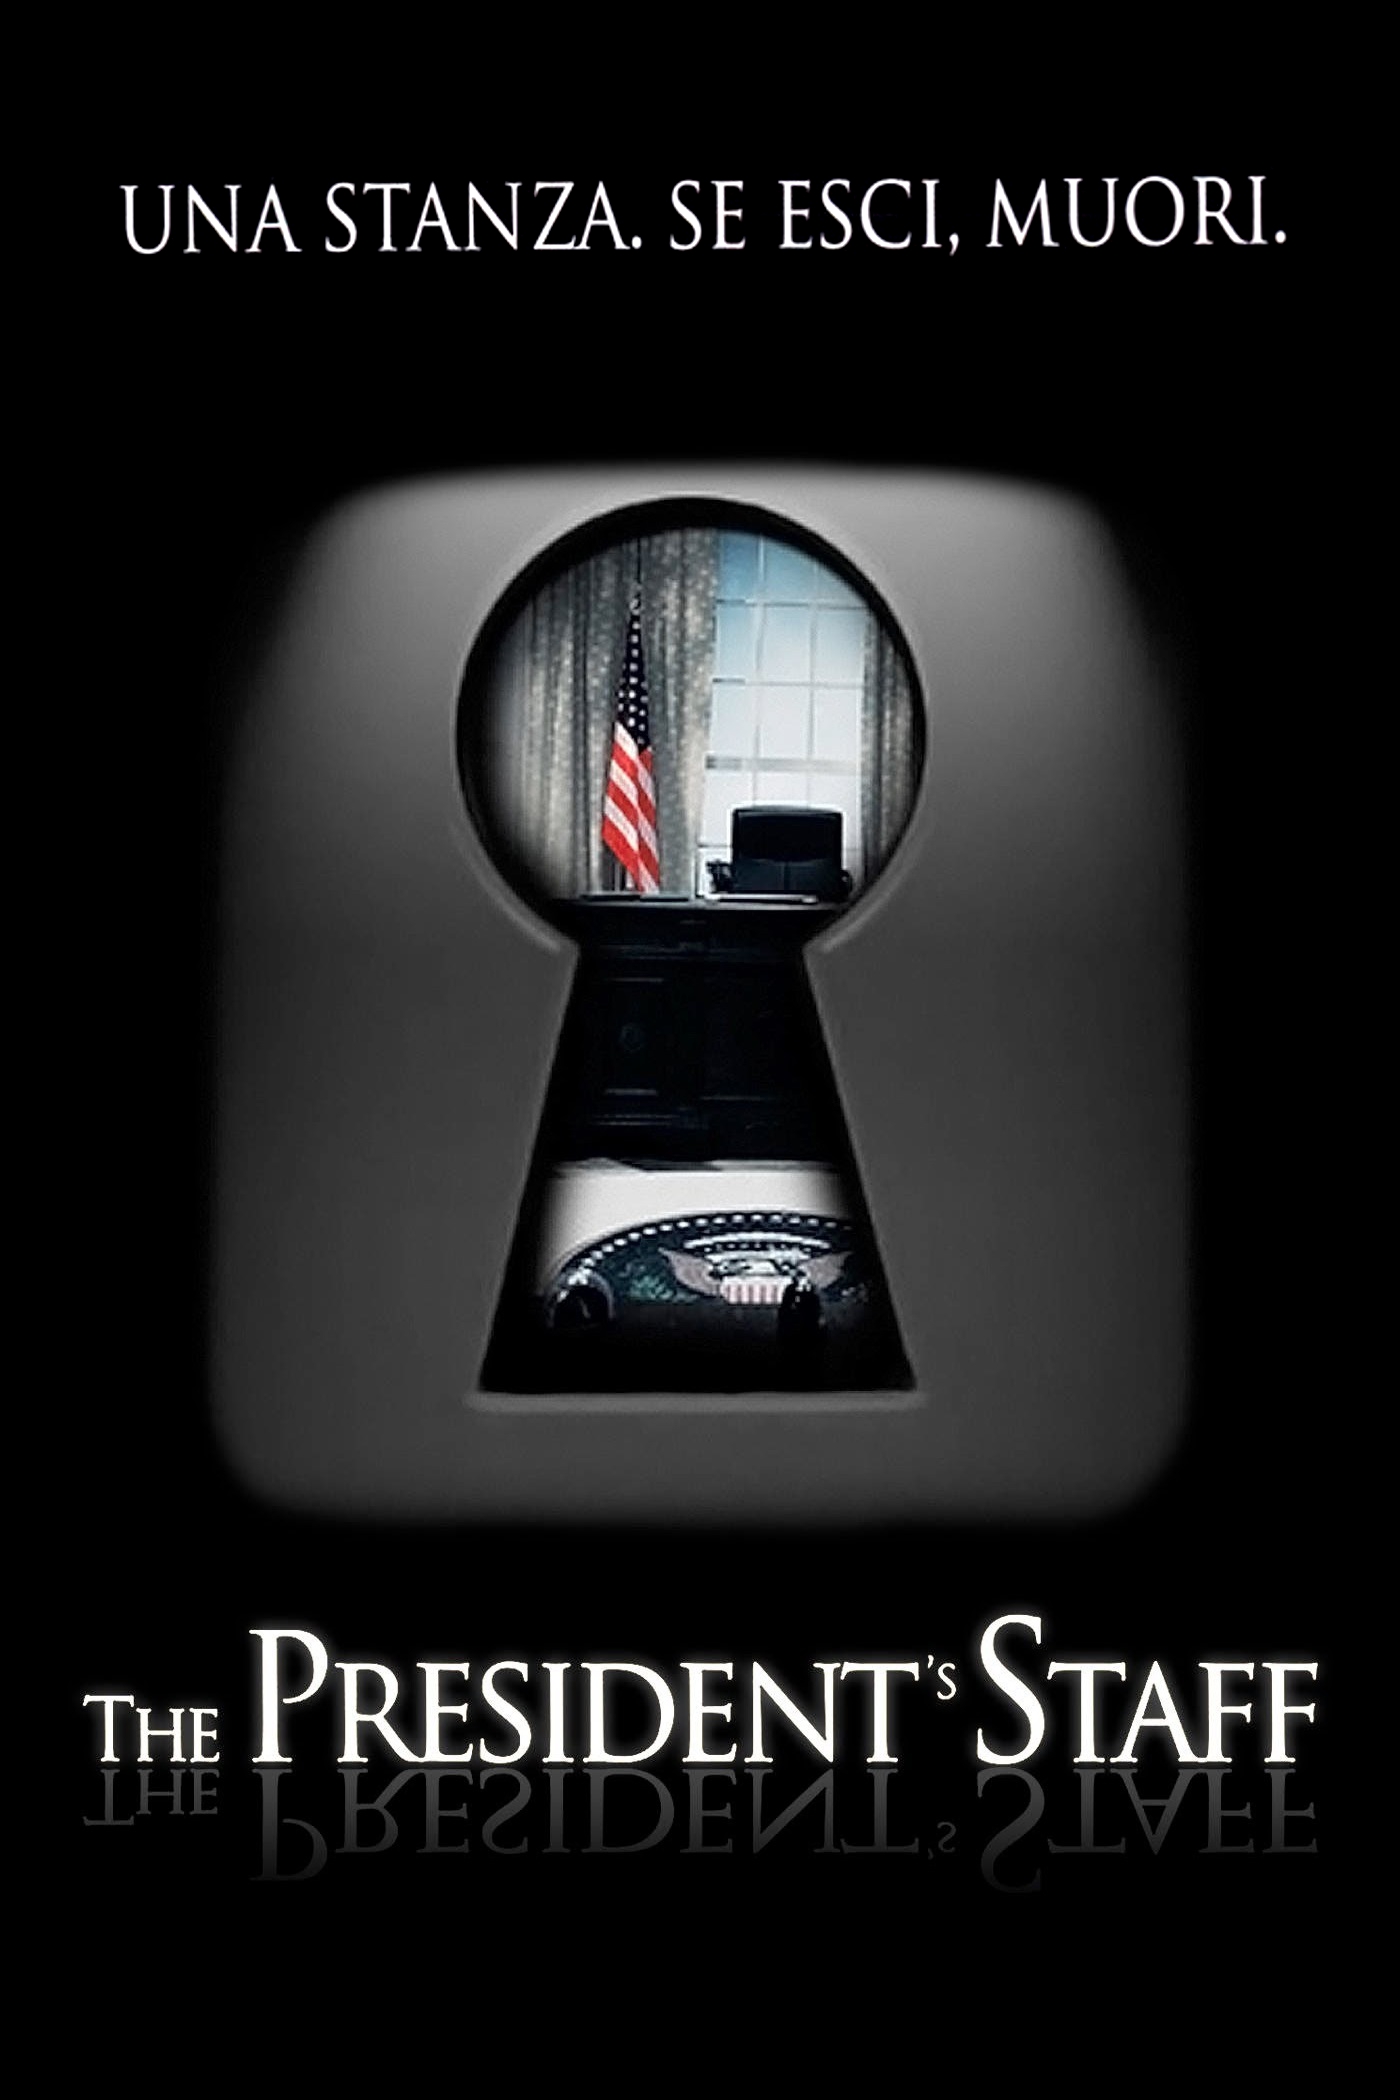 The President’s Staff (2013)